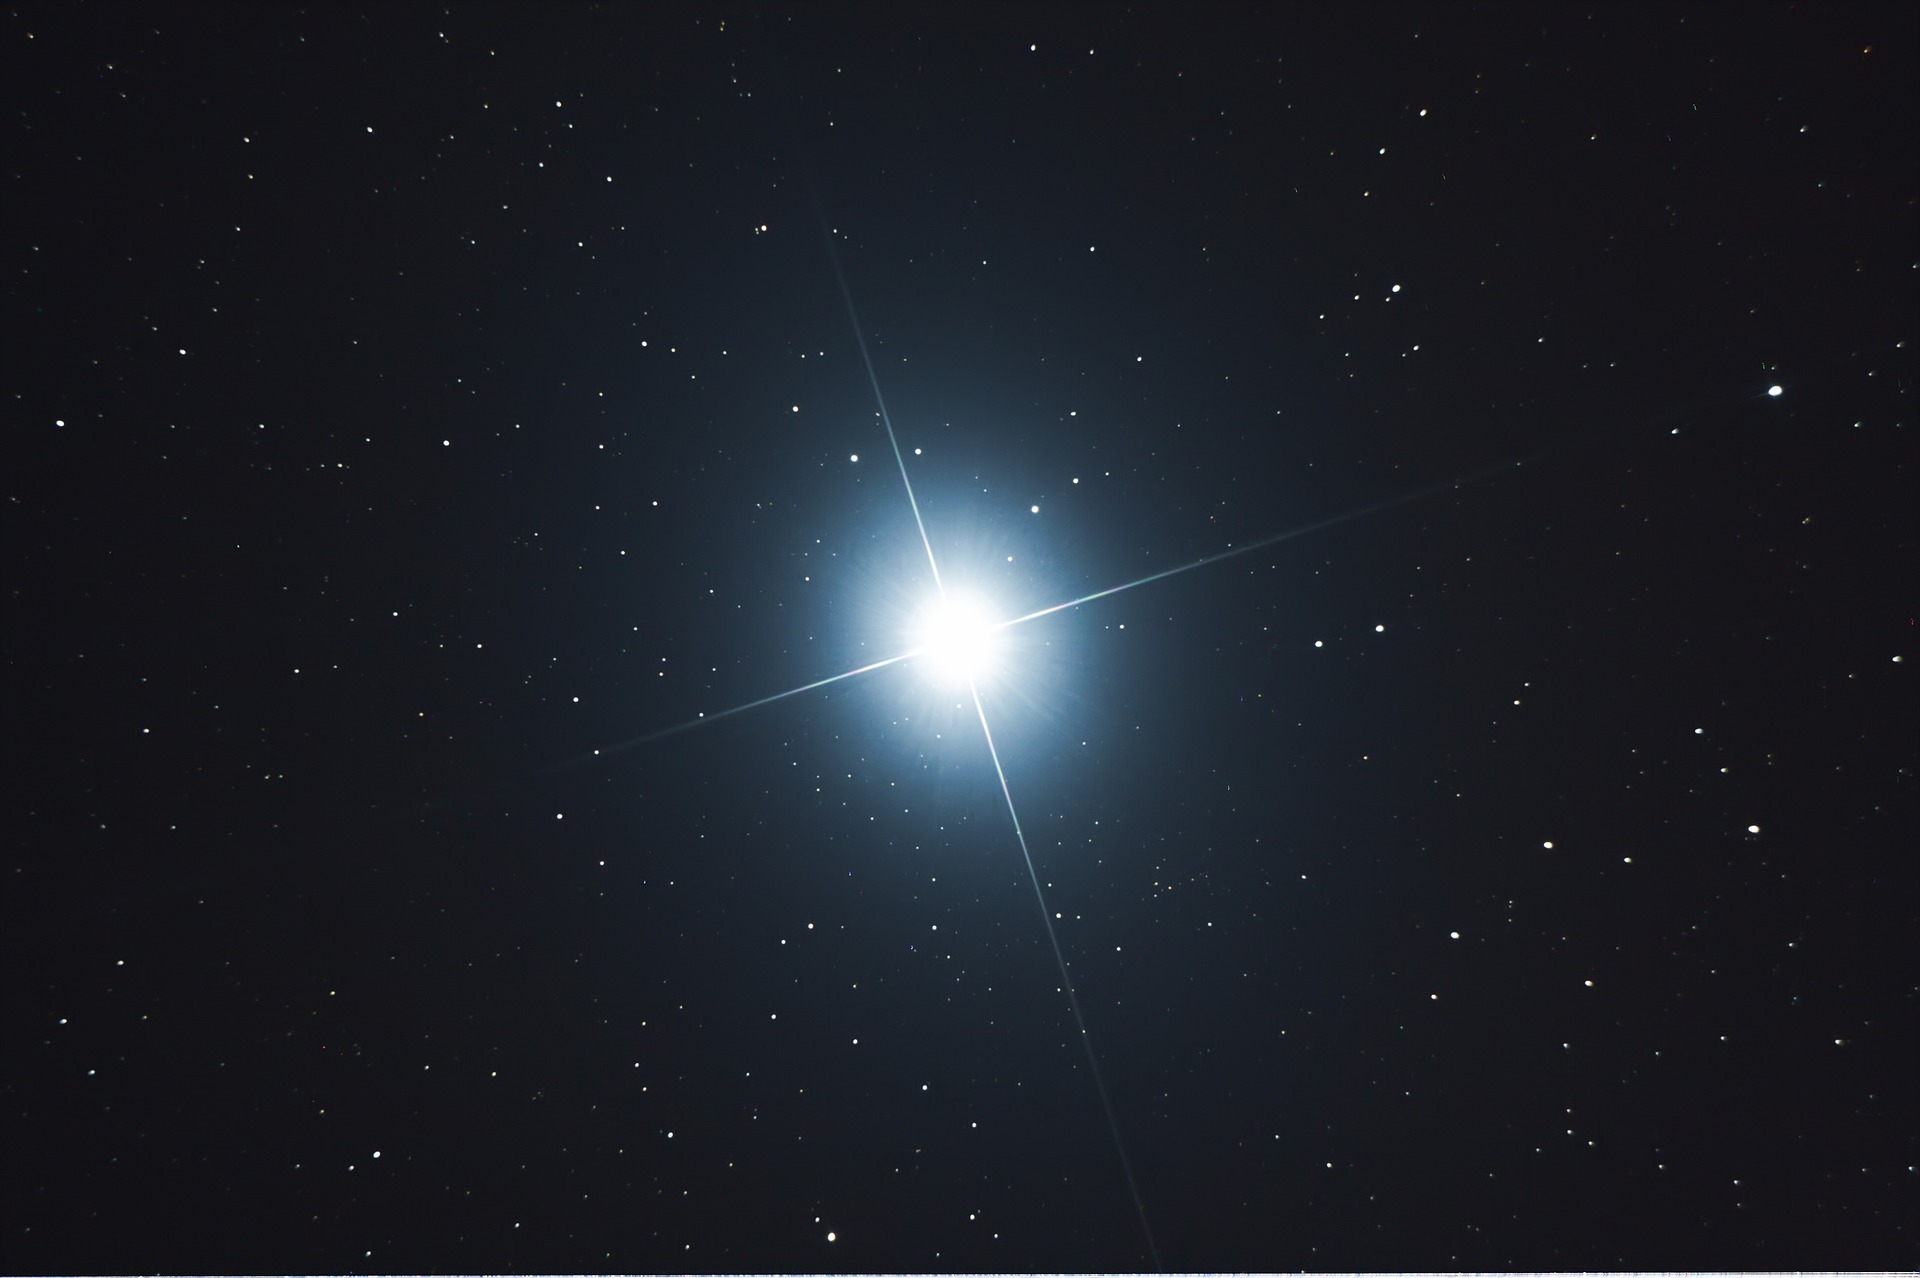 The star Sirius shines brightly in the night sky.